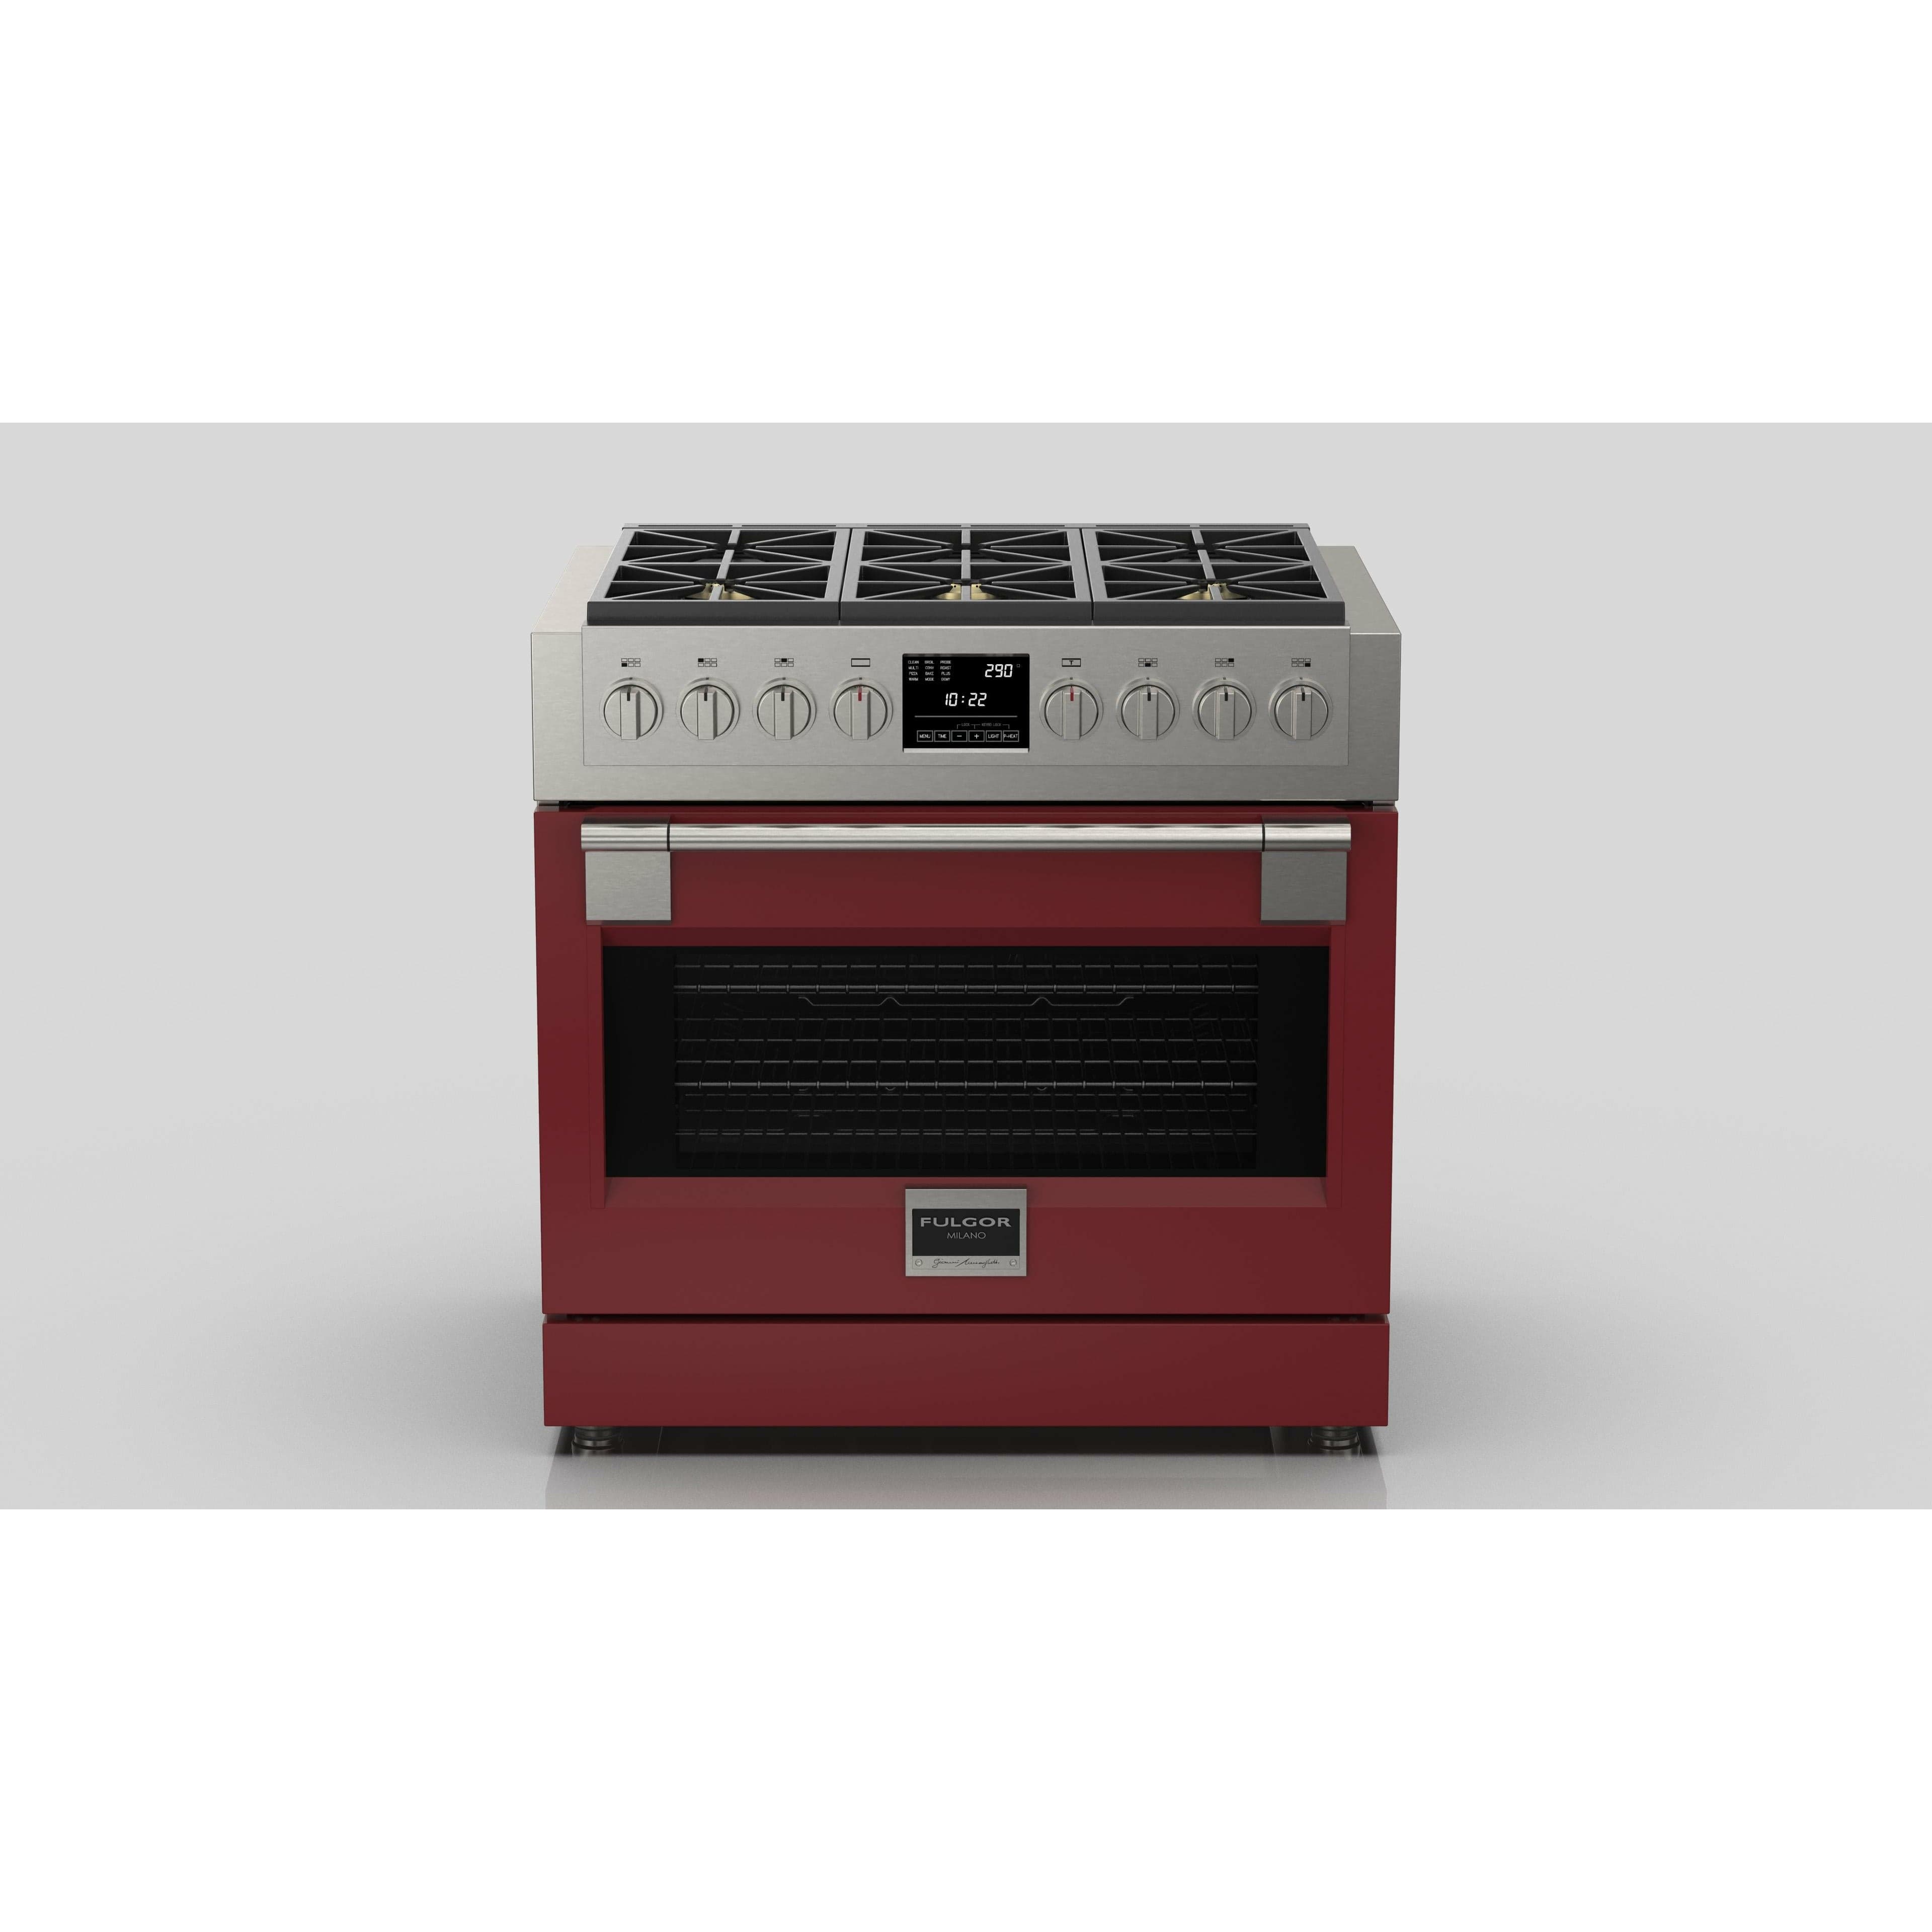 Fulgor Milano 36" Freestanding Dual Pro Fuel Range with Four 18,000 BTU Burners, Stainless Steel - F6PDF366S1 Ranges PDRKIT36RD Luxury Appliances Direct